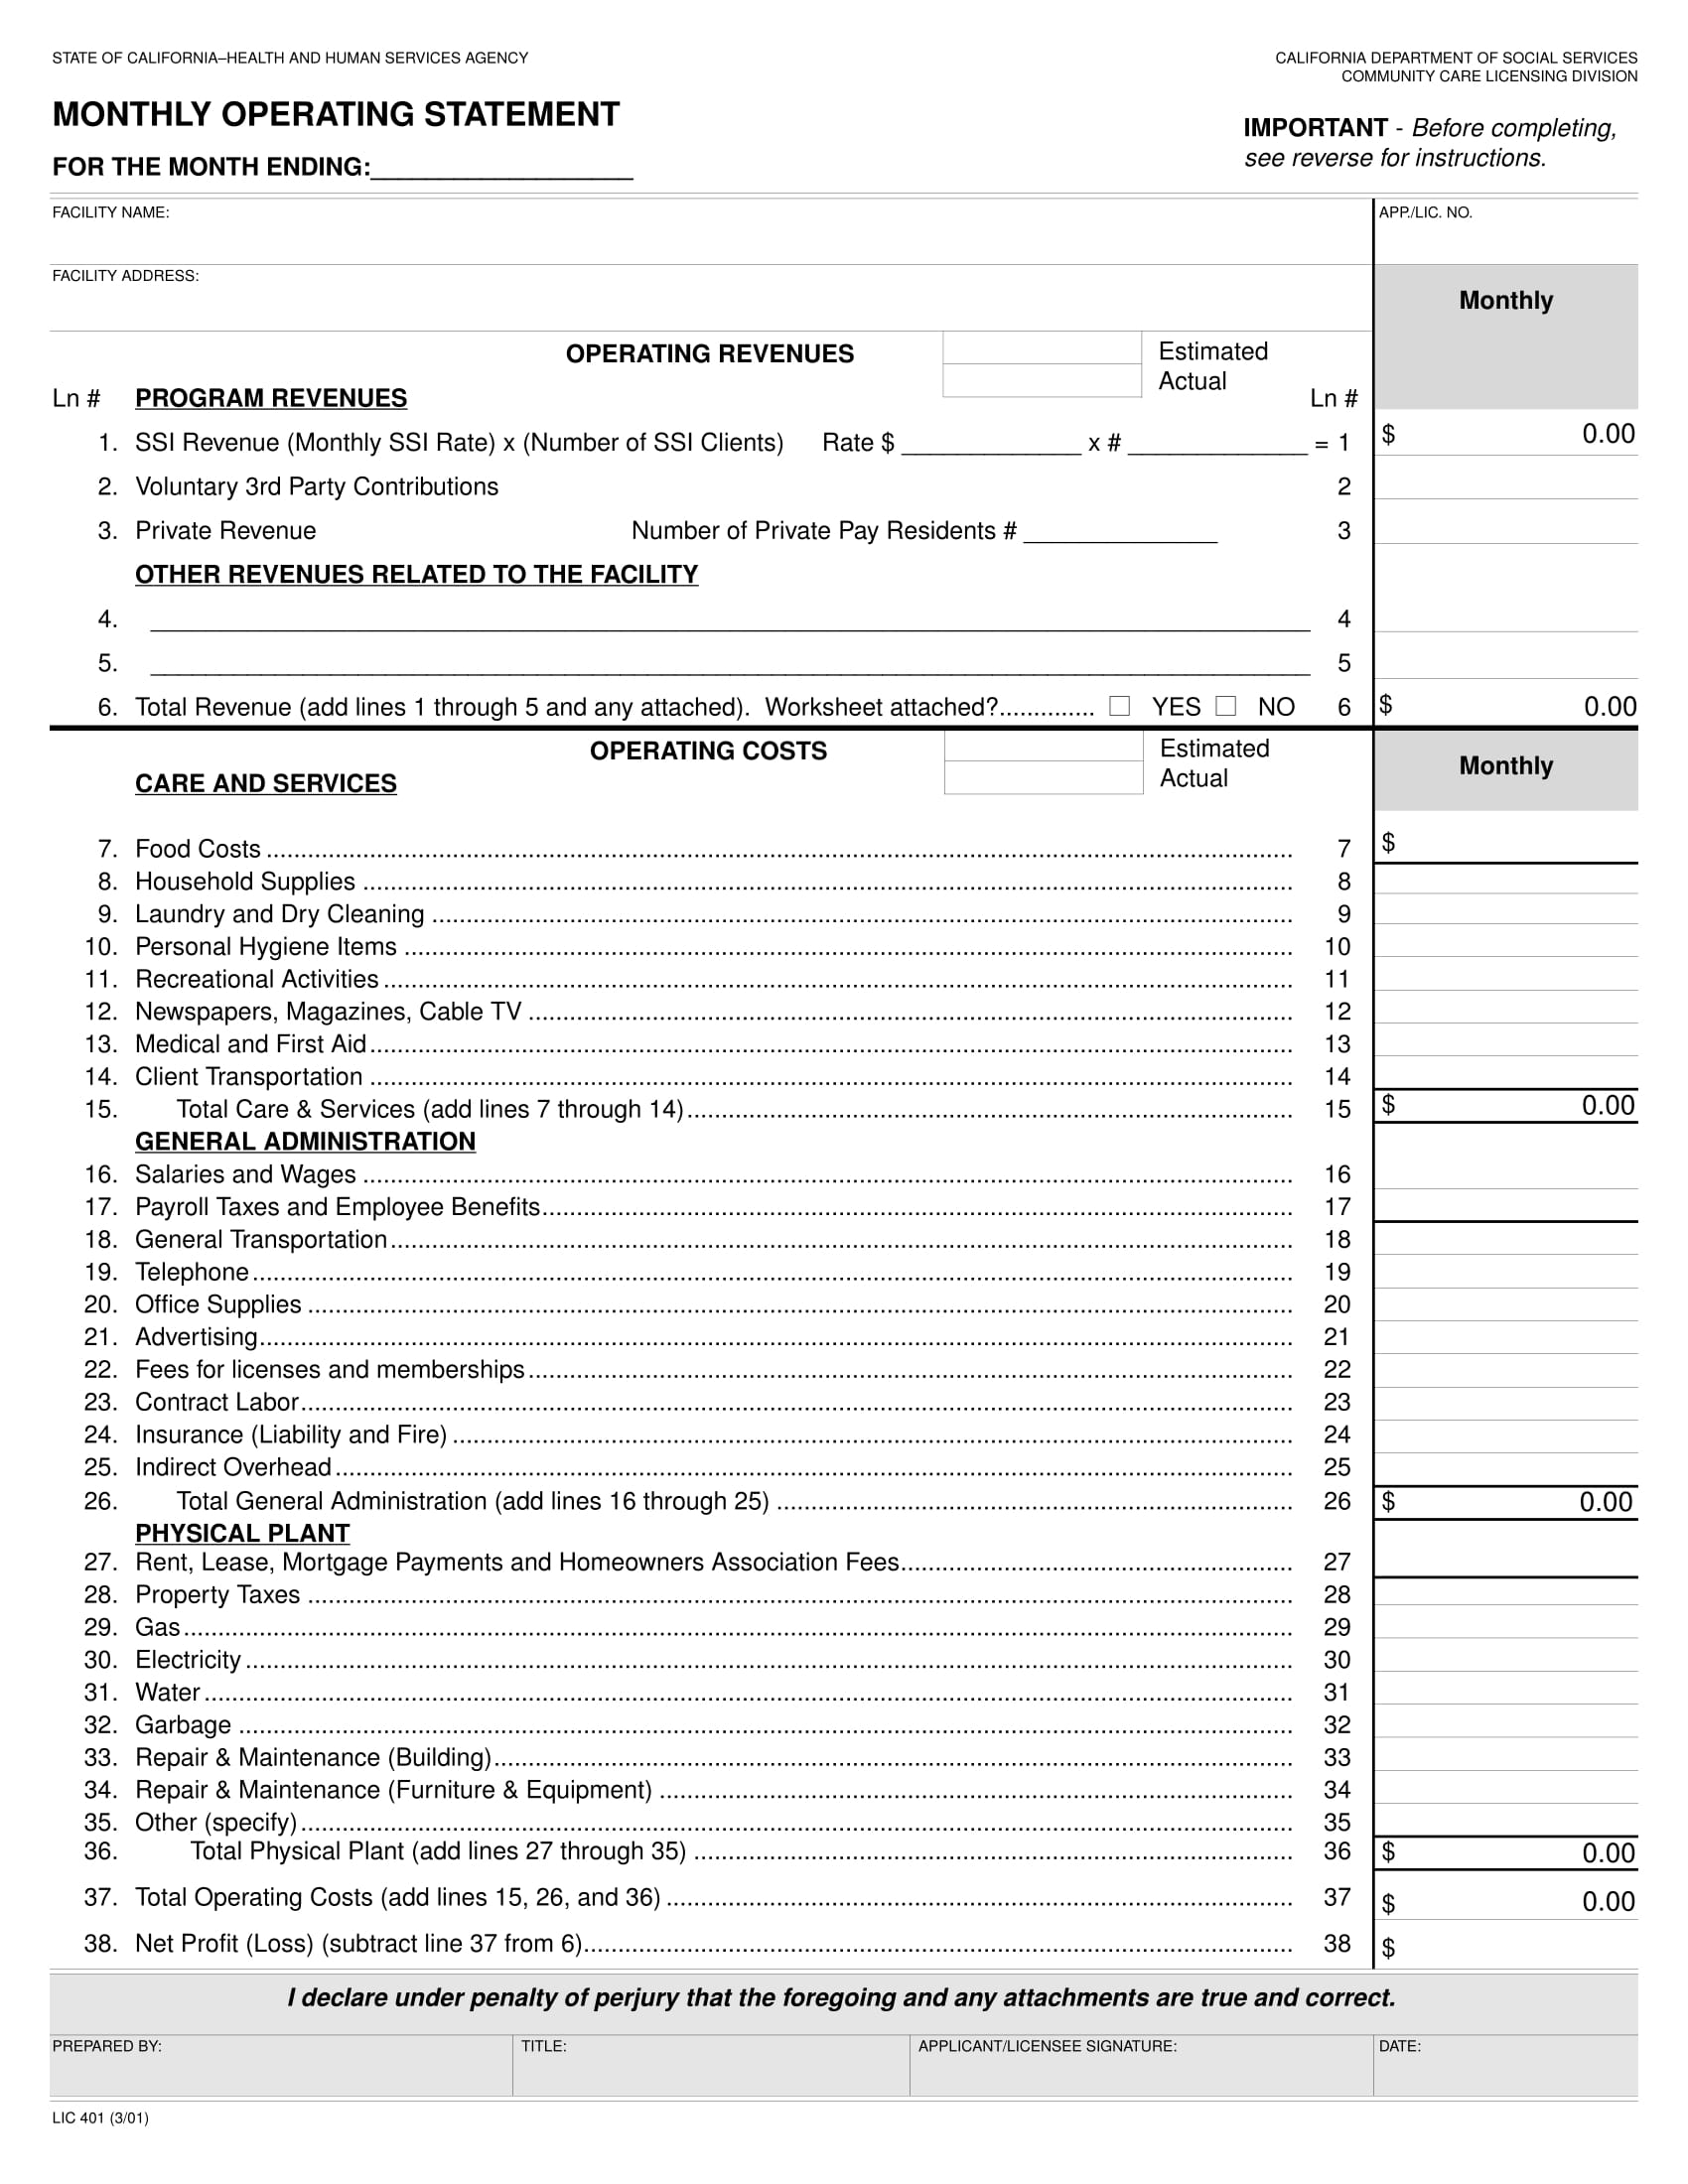 monthly operating statement form 1